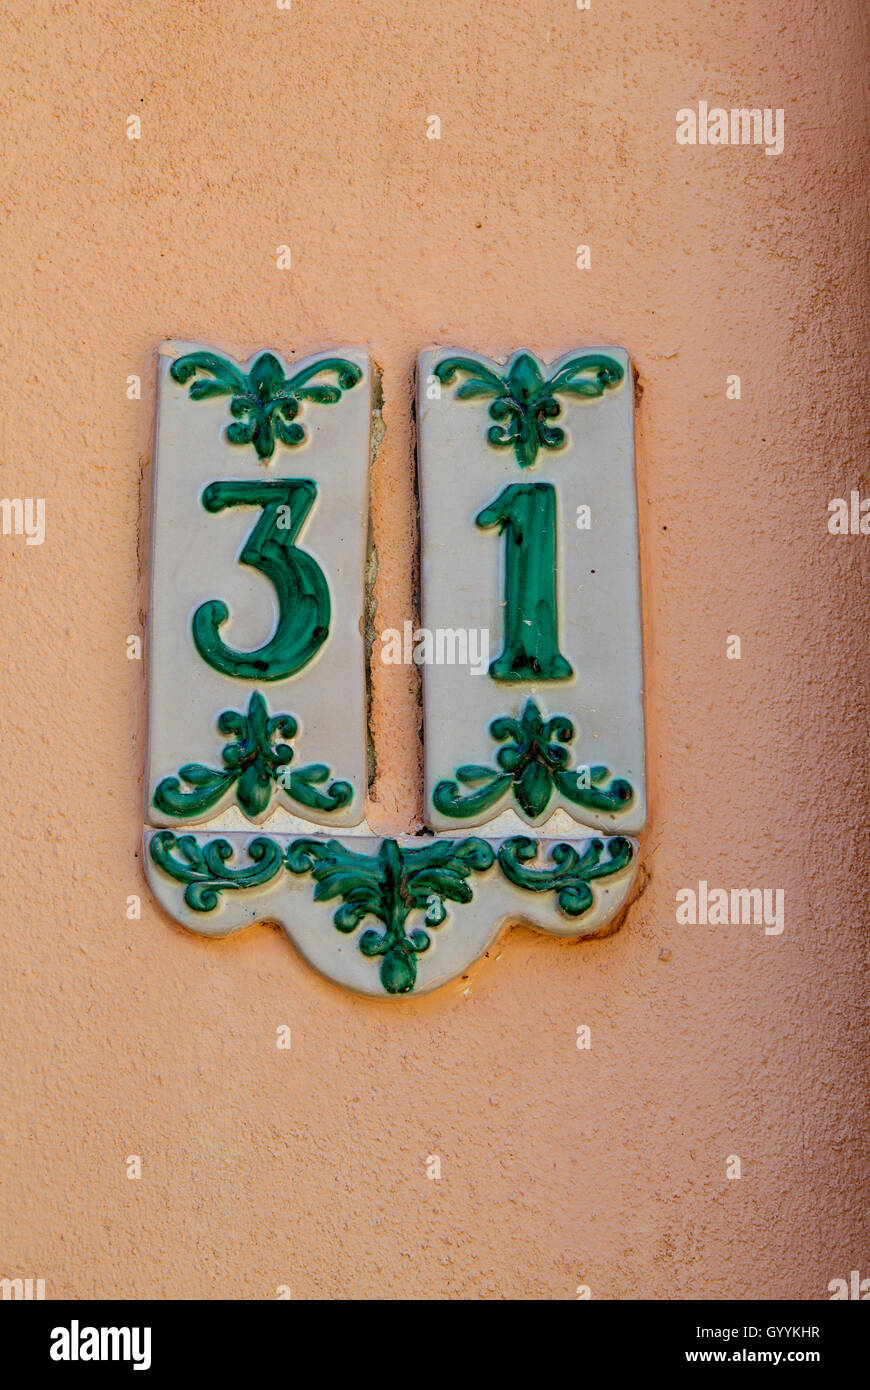 detail of street number Ceramic with old green decorations, thirty-one. Stock Photo